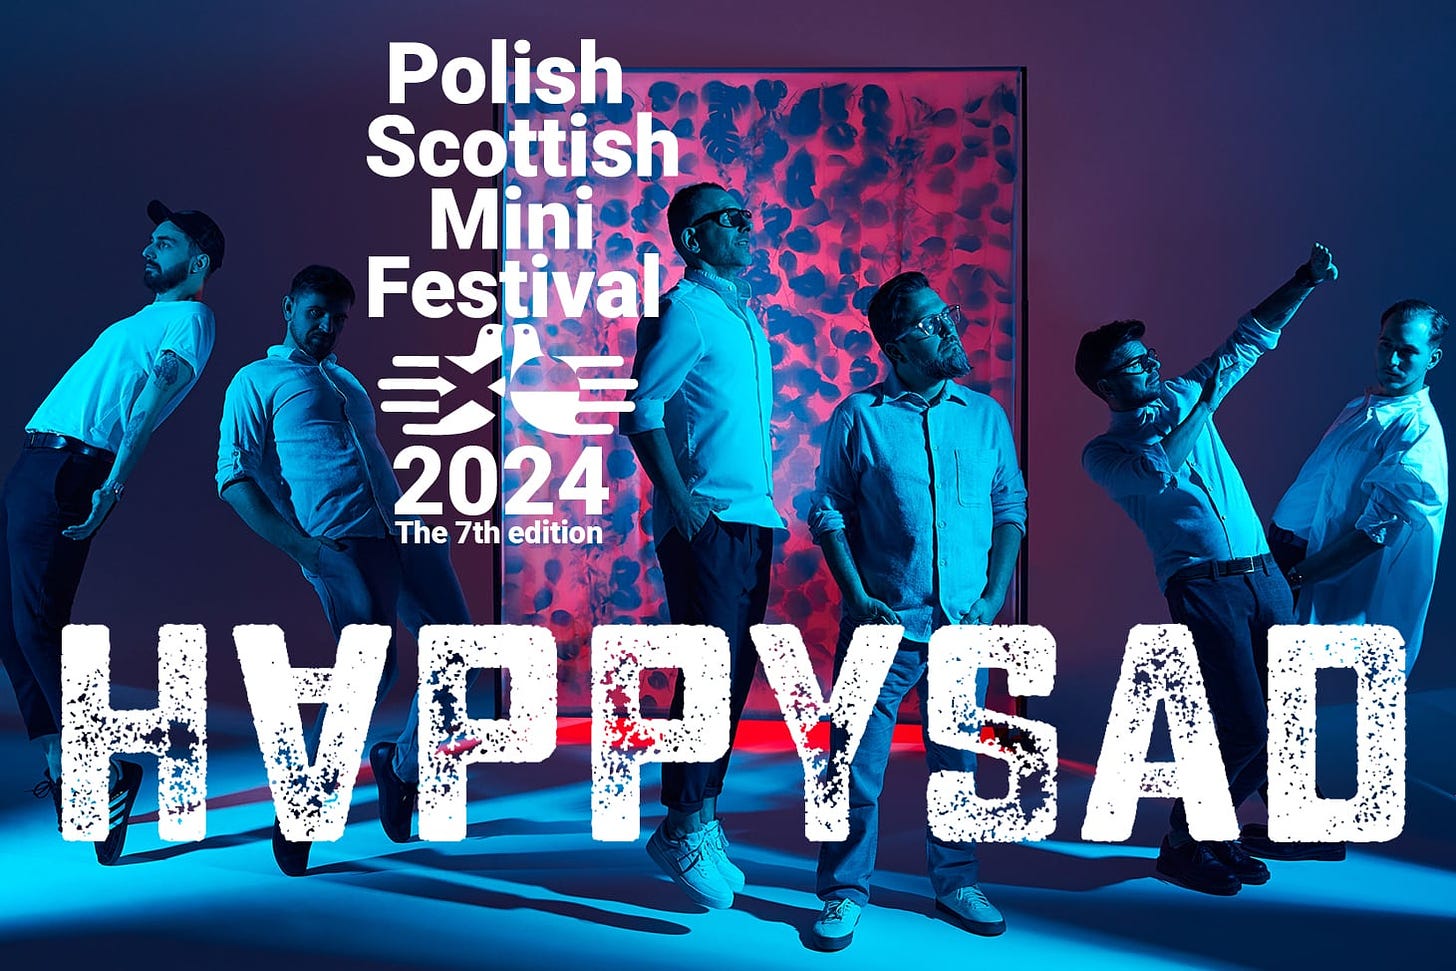 This is a promotional image for the Polish Scottish Mini Festival 2024. The image features a group of six individuals striking various poses with dynamic expressions, suggesting a lively and expressive event atmosphere. The background is a blend of cool blues and vibrant pinks, with a large, visually intriguing pattern that could be a representation of cultural fusion. Prominently displayed is the word "HVPPYSAD" in large, distressed font. Overall, the graphic design conveys a sense of energy and cultural blend, fitting for a festival celebrating Polish and Scottish traditions and contemporary arts.